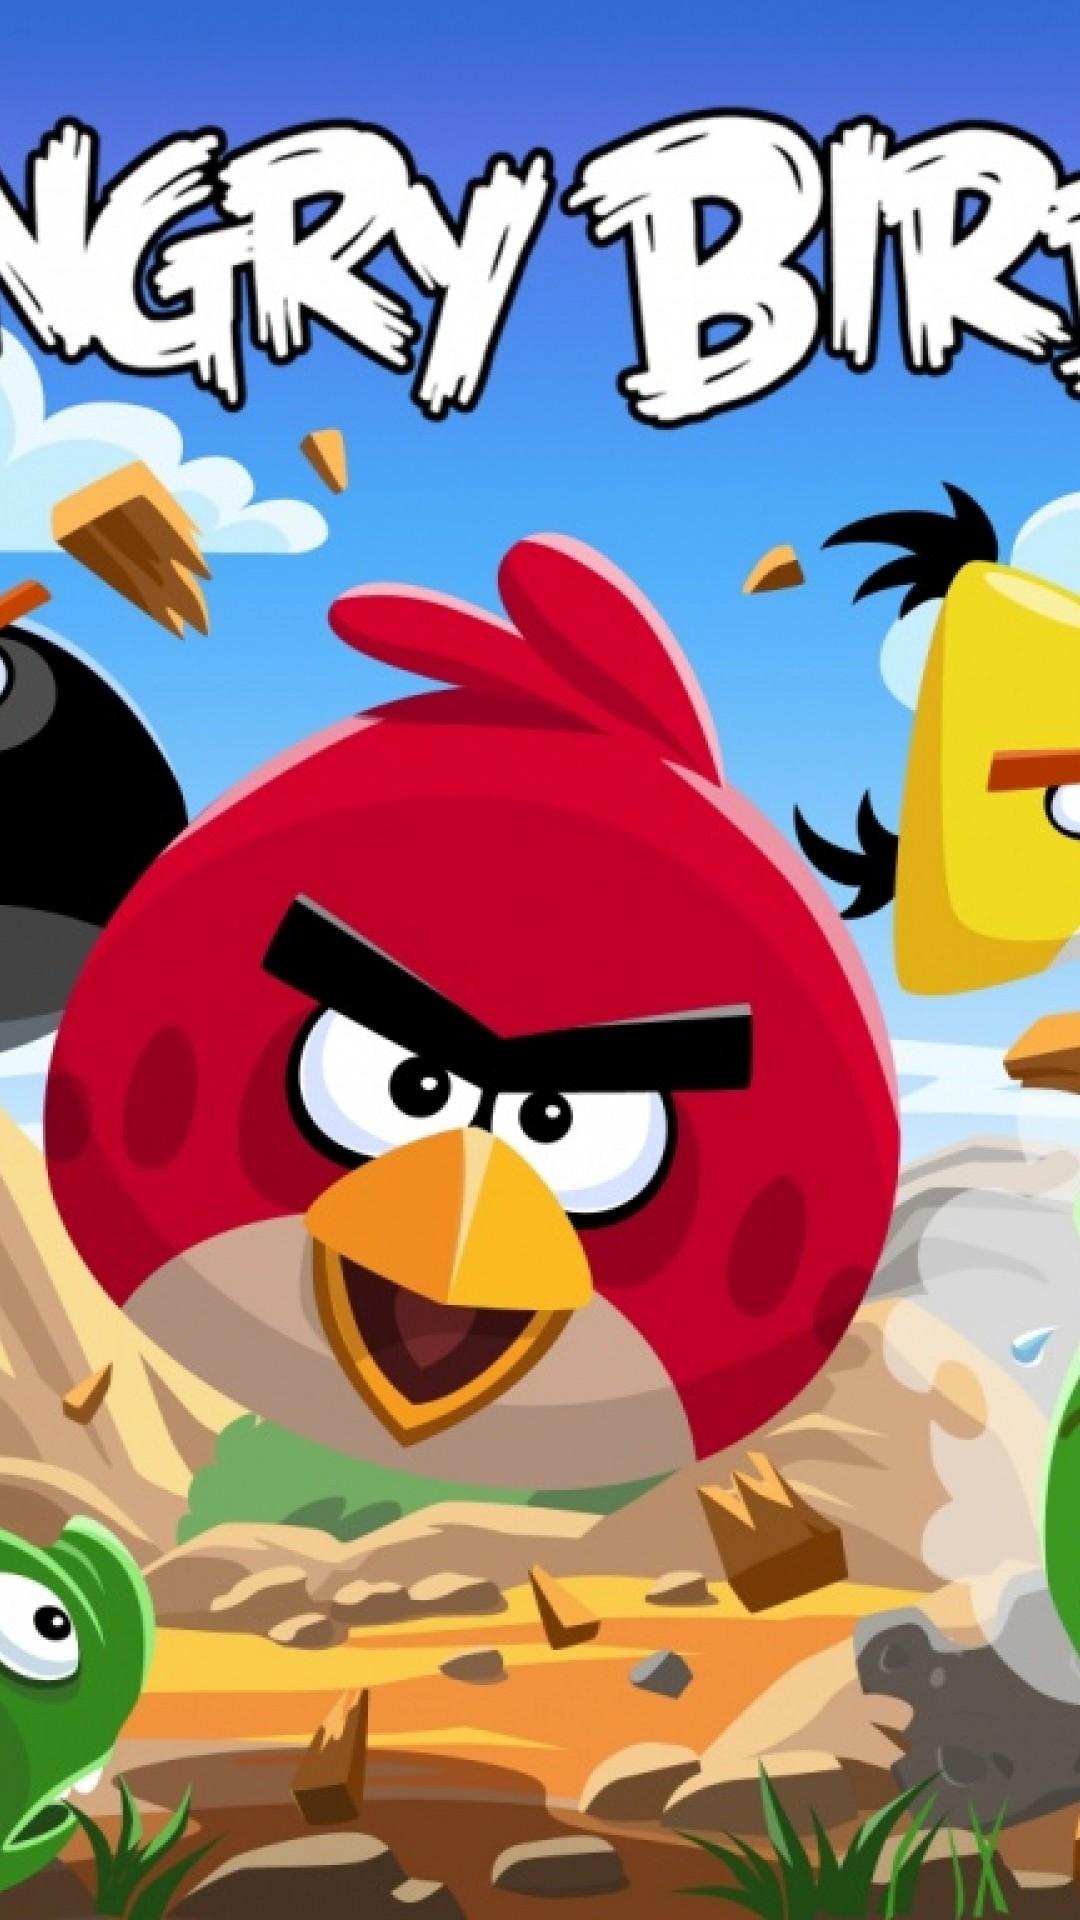 Free Download Angry Birds HD Wallpaper for Desktop and Mobiles